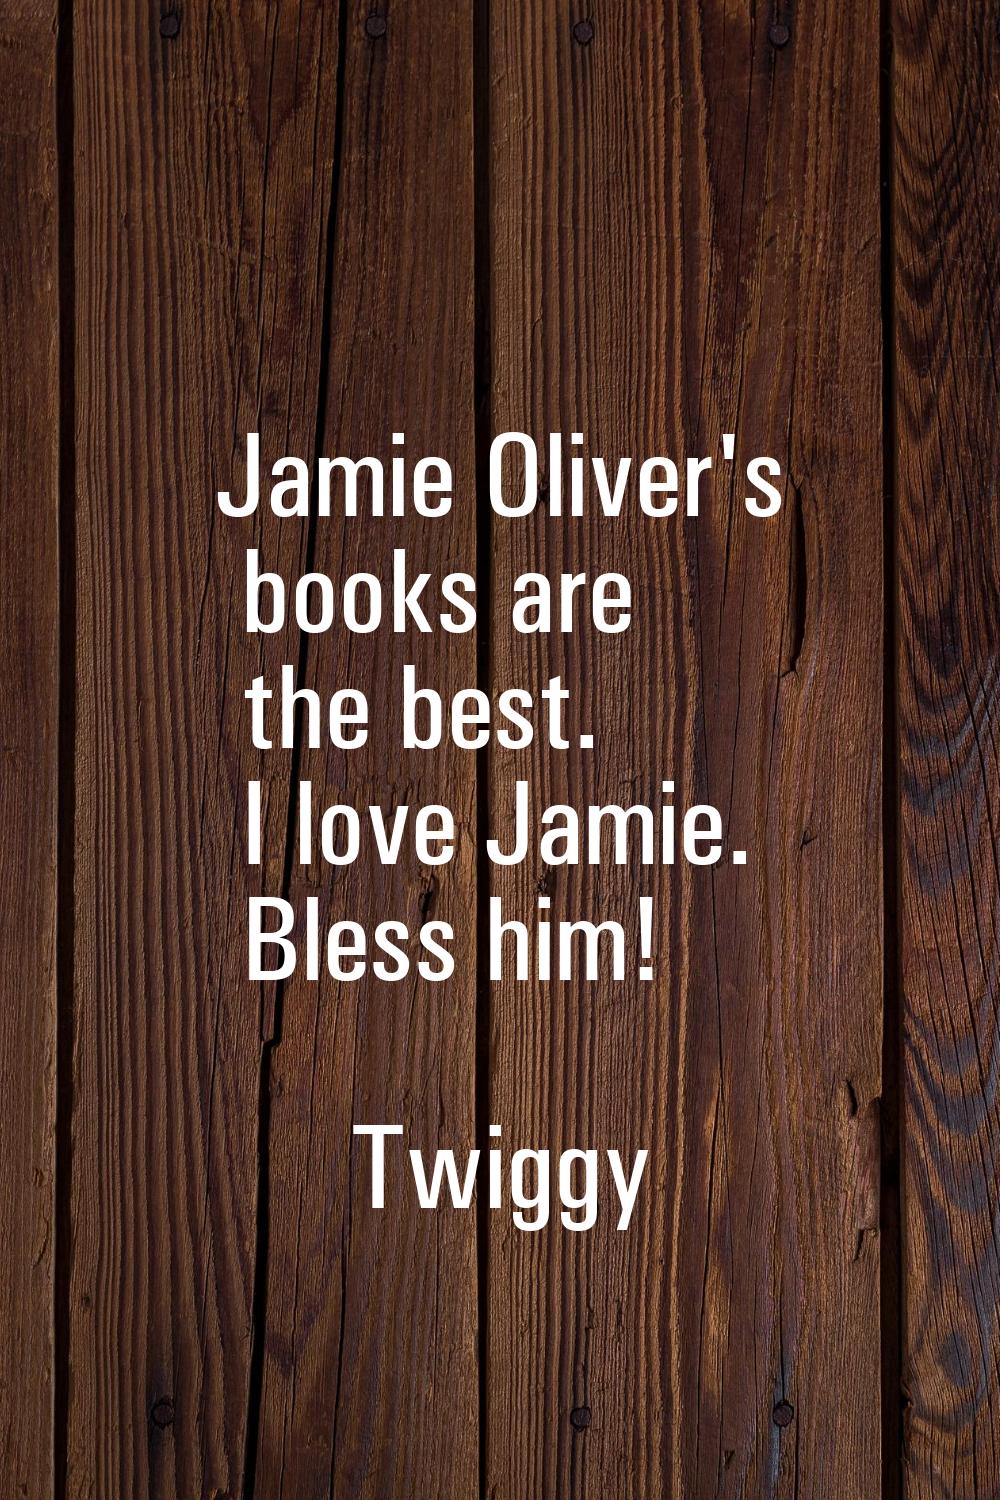 Jamie Oliver's books are the best. I love Jamie. Bless him!